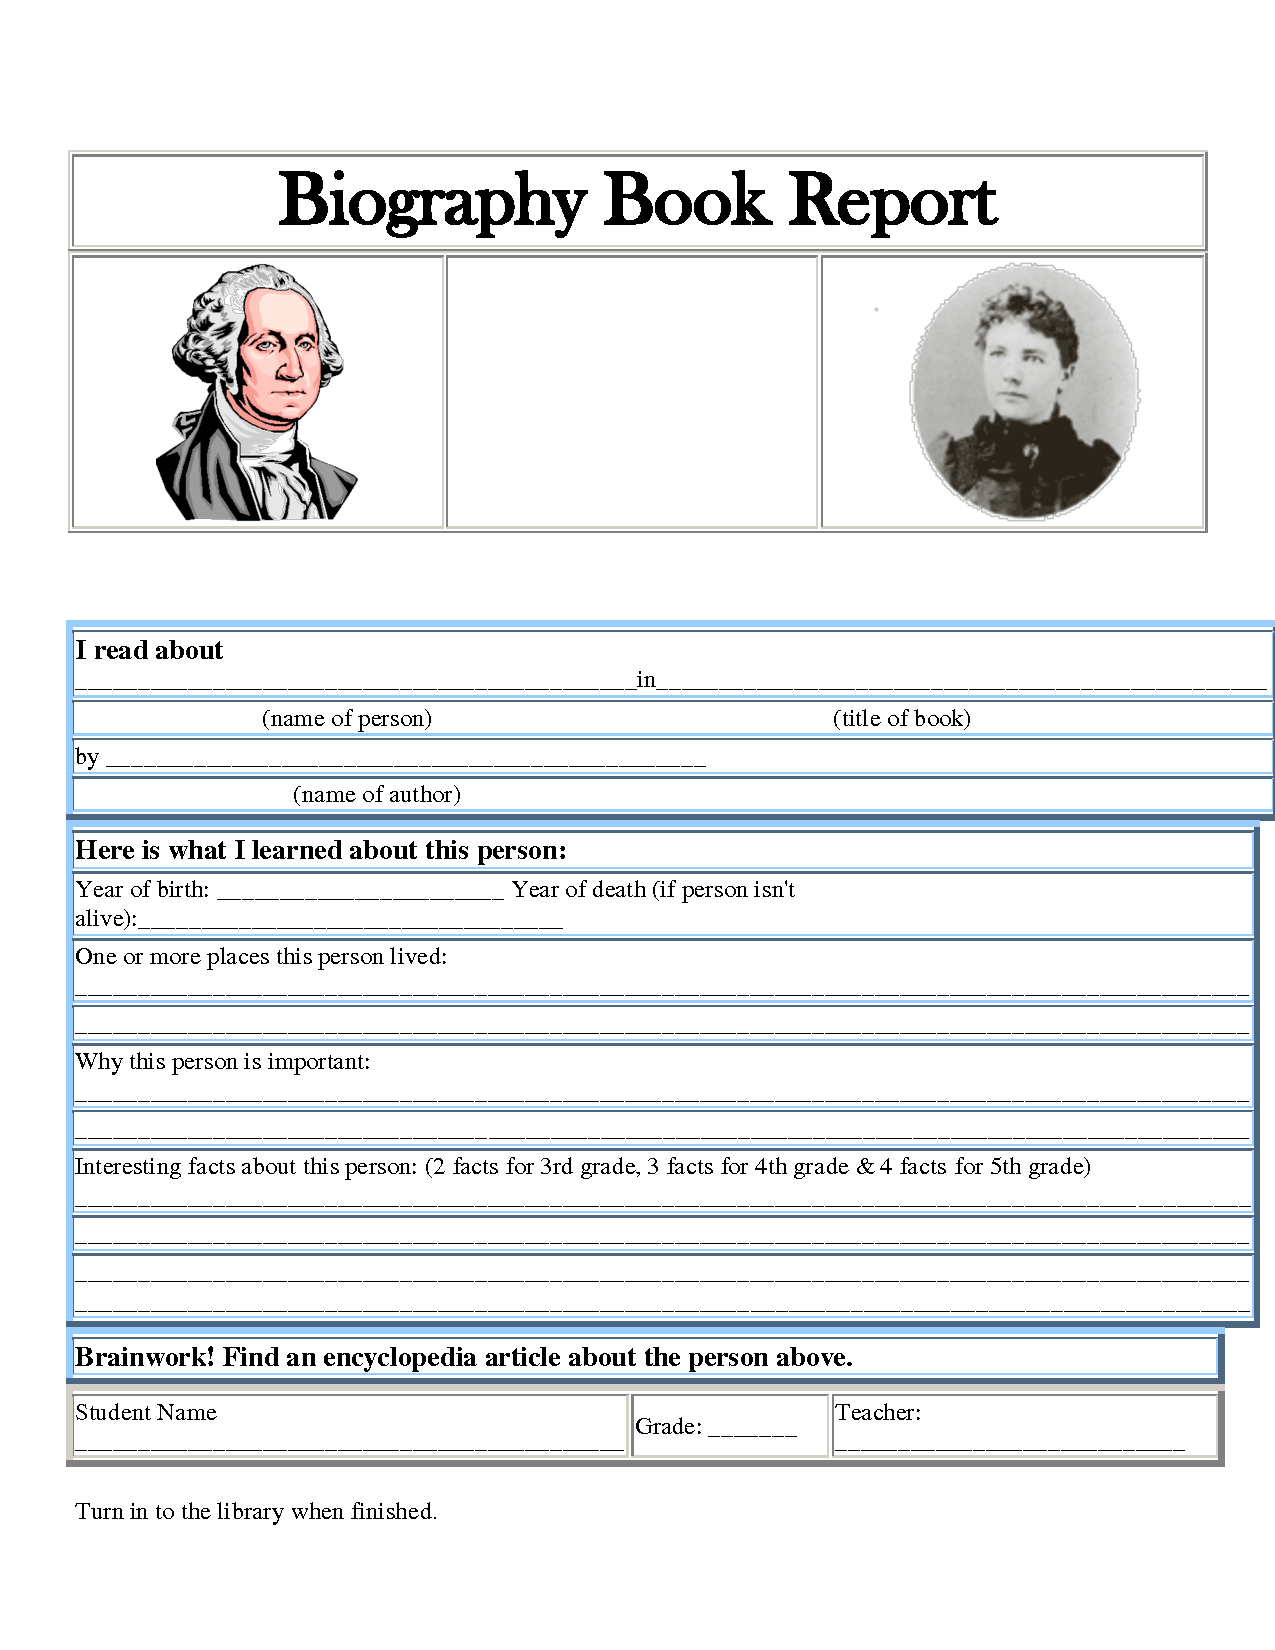 5Th Grade Dol Worksheet | Printable Worksheets And In Biography Book Report Template